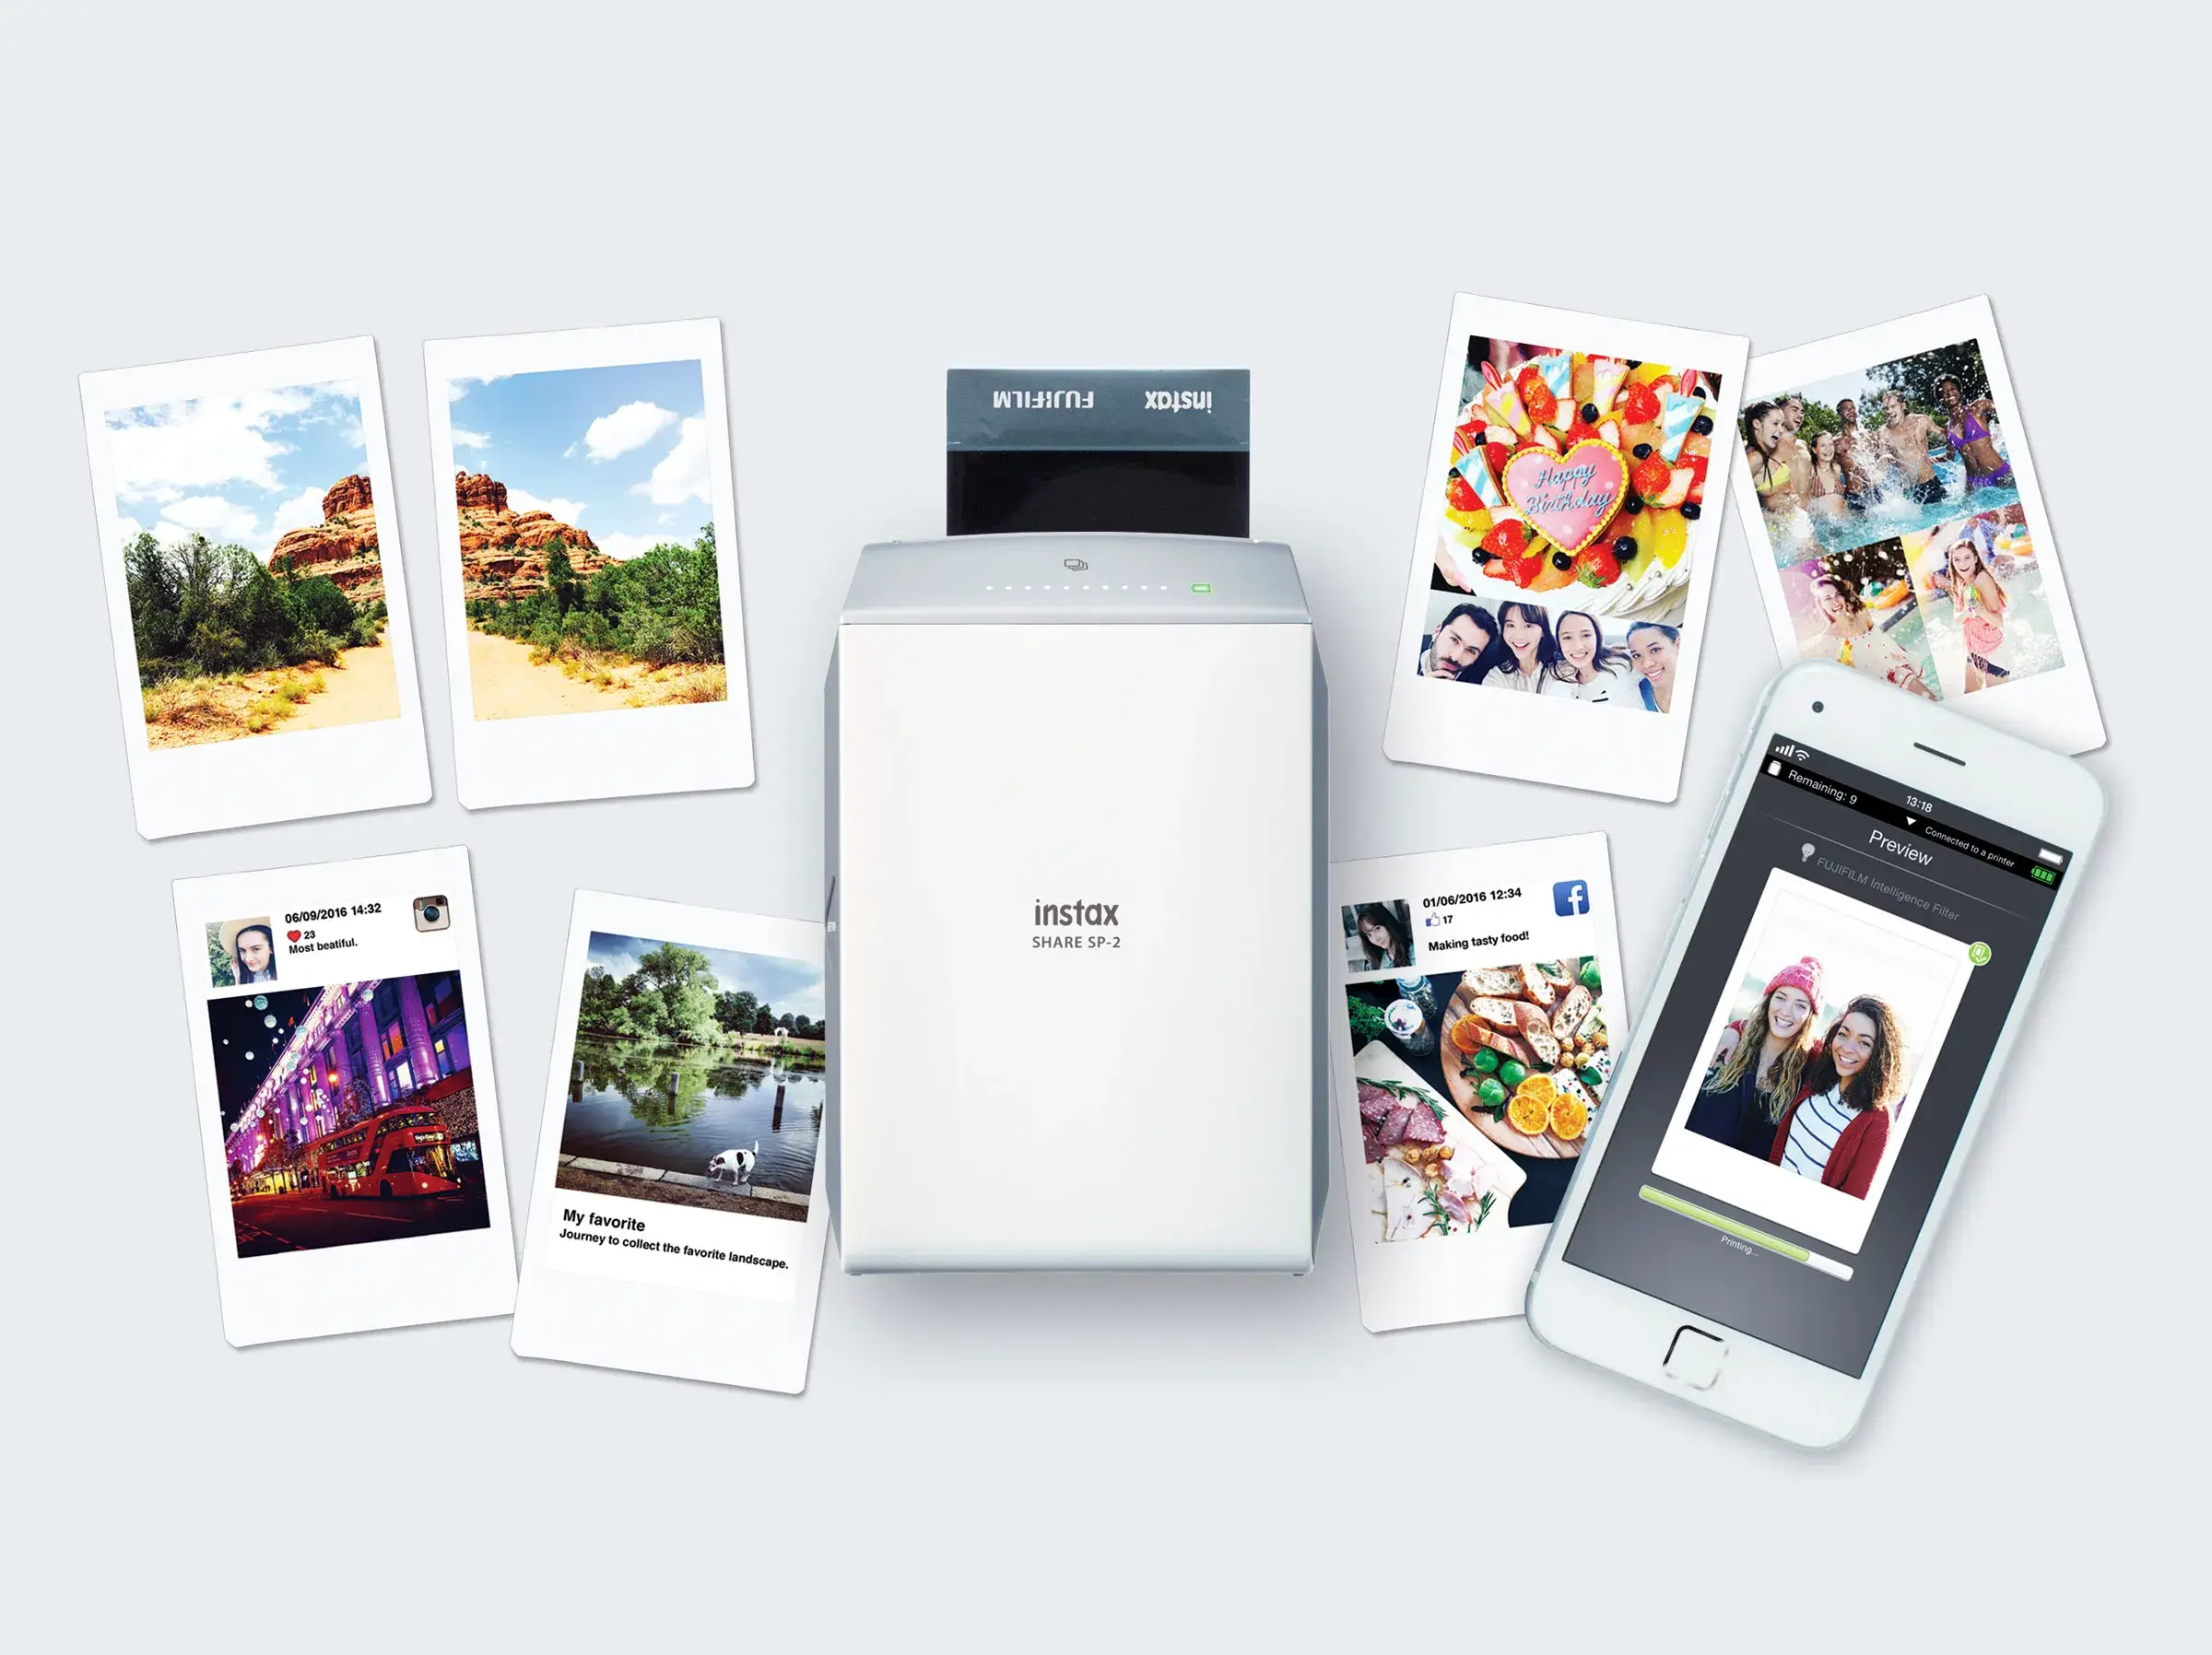 How to Connect an Instax Printer